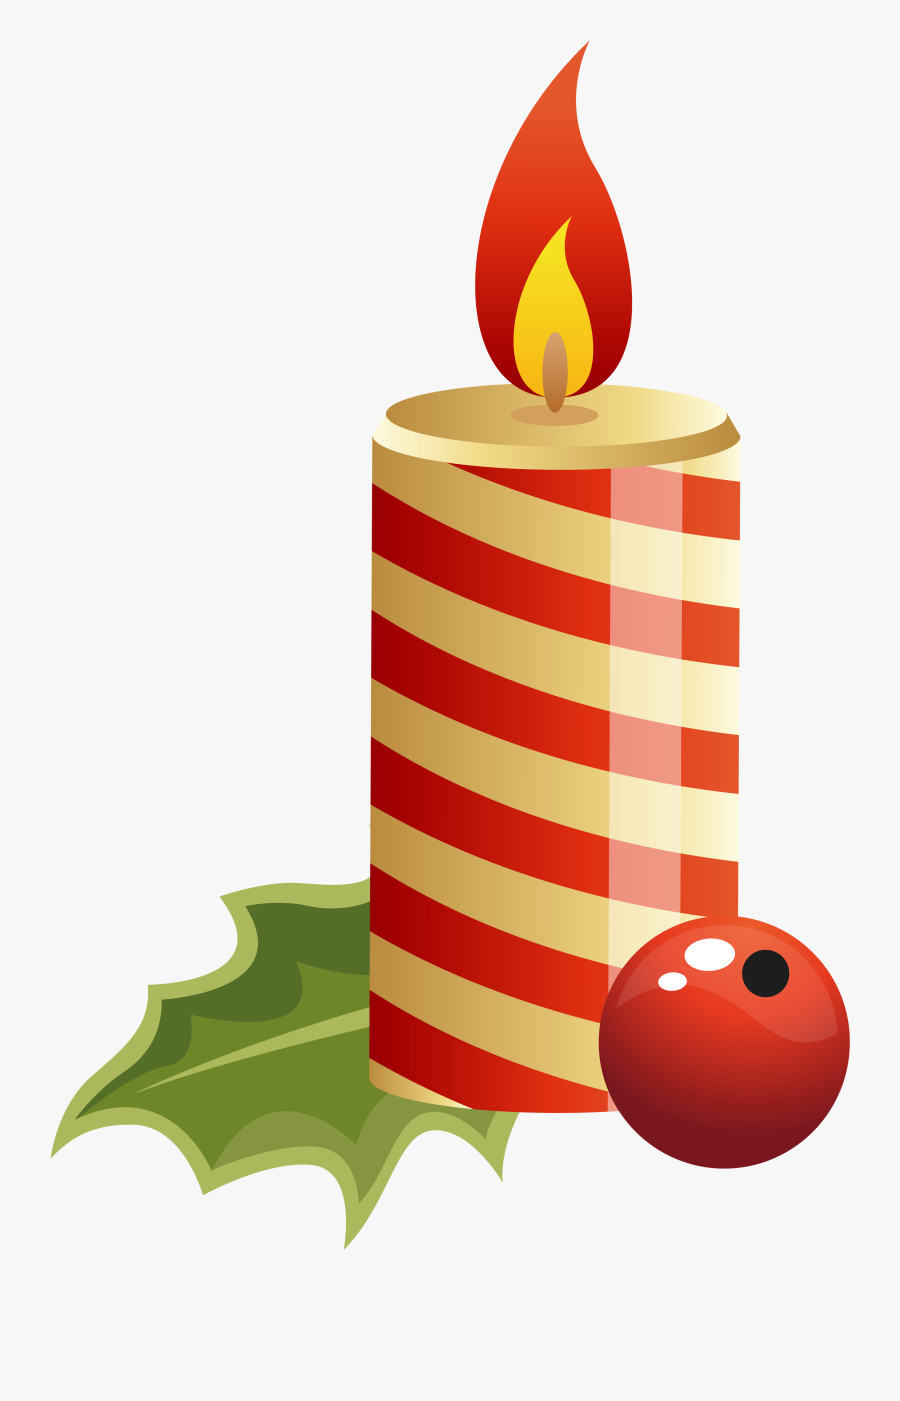 Candle Clipart Christmas Candles - Christmas Candle Clipart, Transparent Clipart